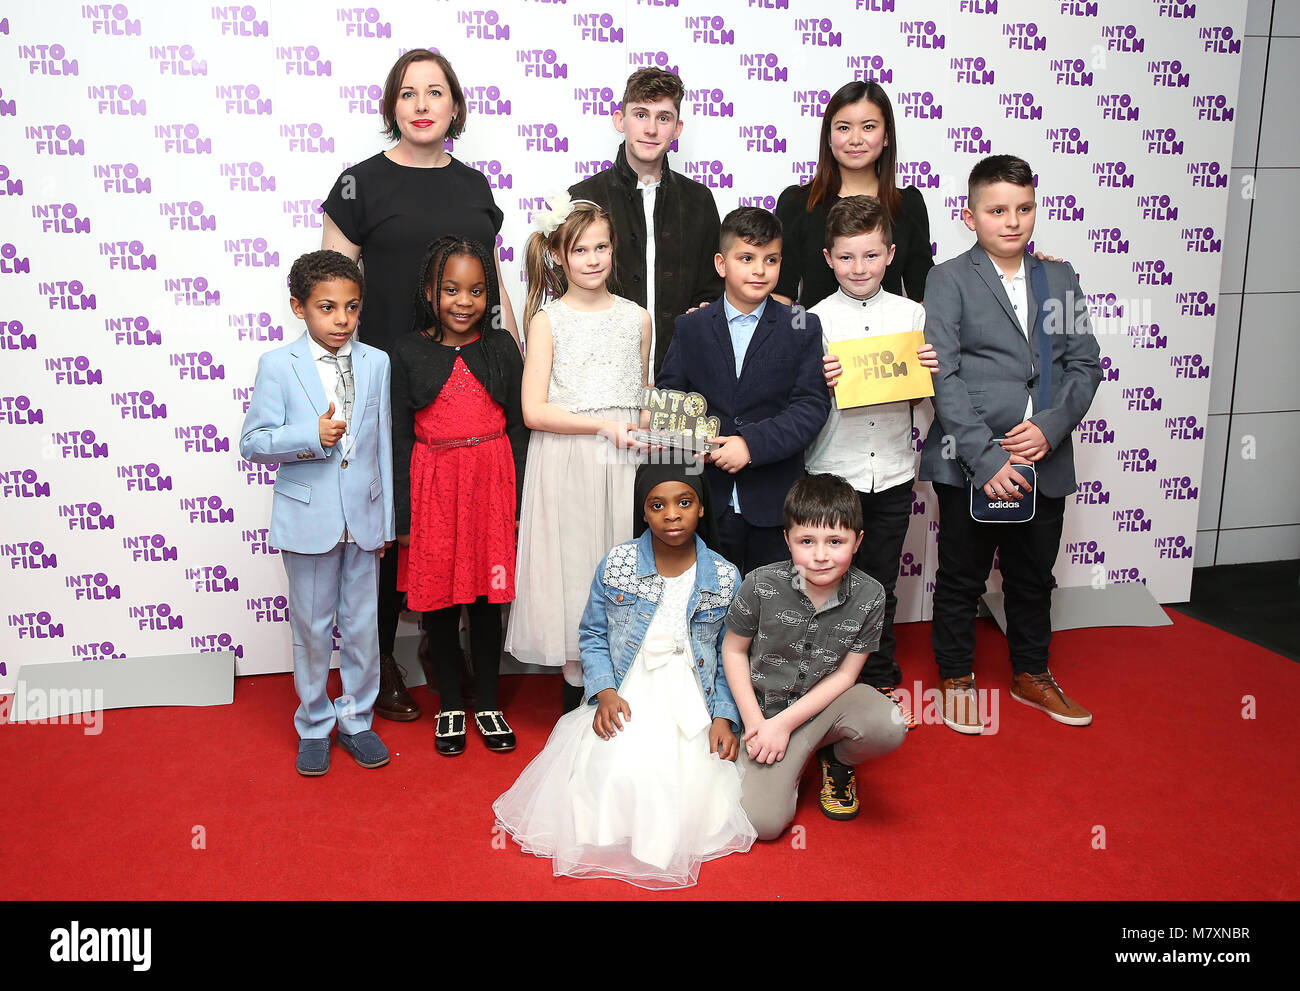 Fionn O'Shea (centre) and Katie Leung (right) present the award for Club of the Year (12 and under) to Horton Park Primary School in Bradford at the Into Film Awards 2018 held at the BFI Southbank, London. PRESS ASSOCIATION Photo. Picture date: Tuesday March 13, 2018. Photo credit should read: Isabel Infantes/PA Wire Stock Photo